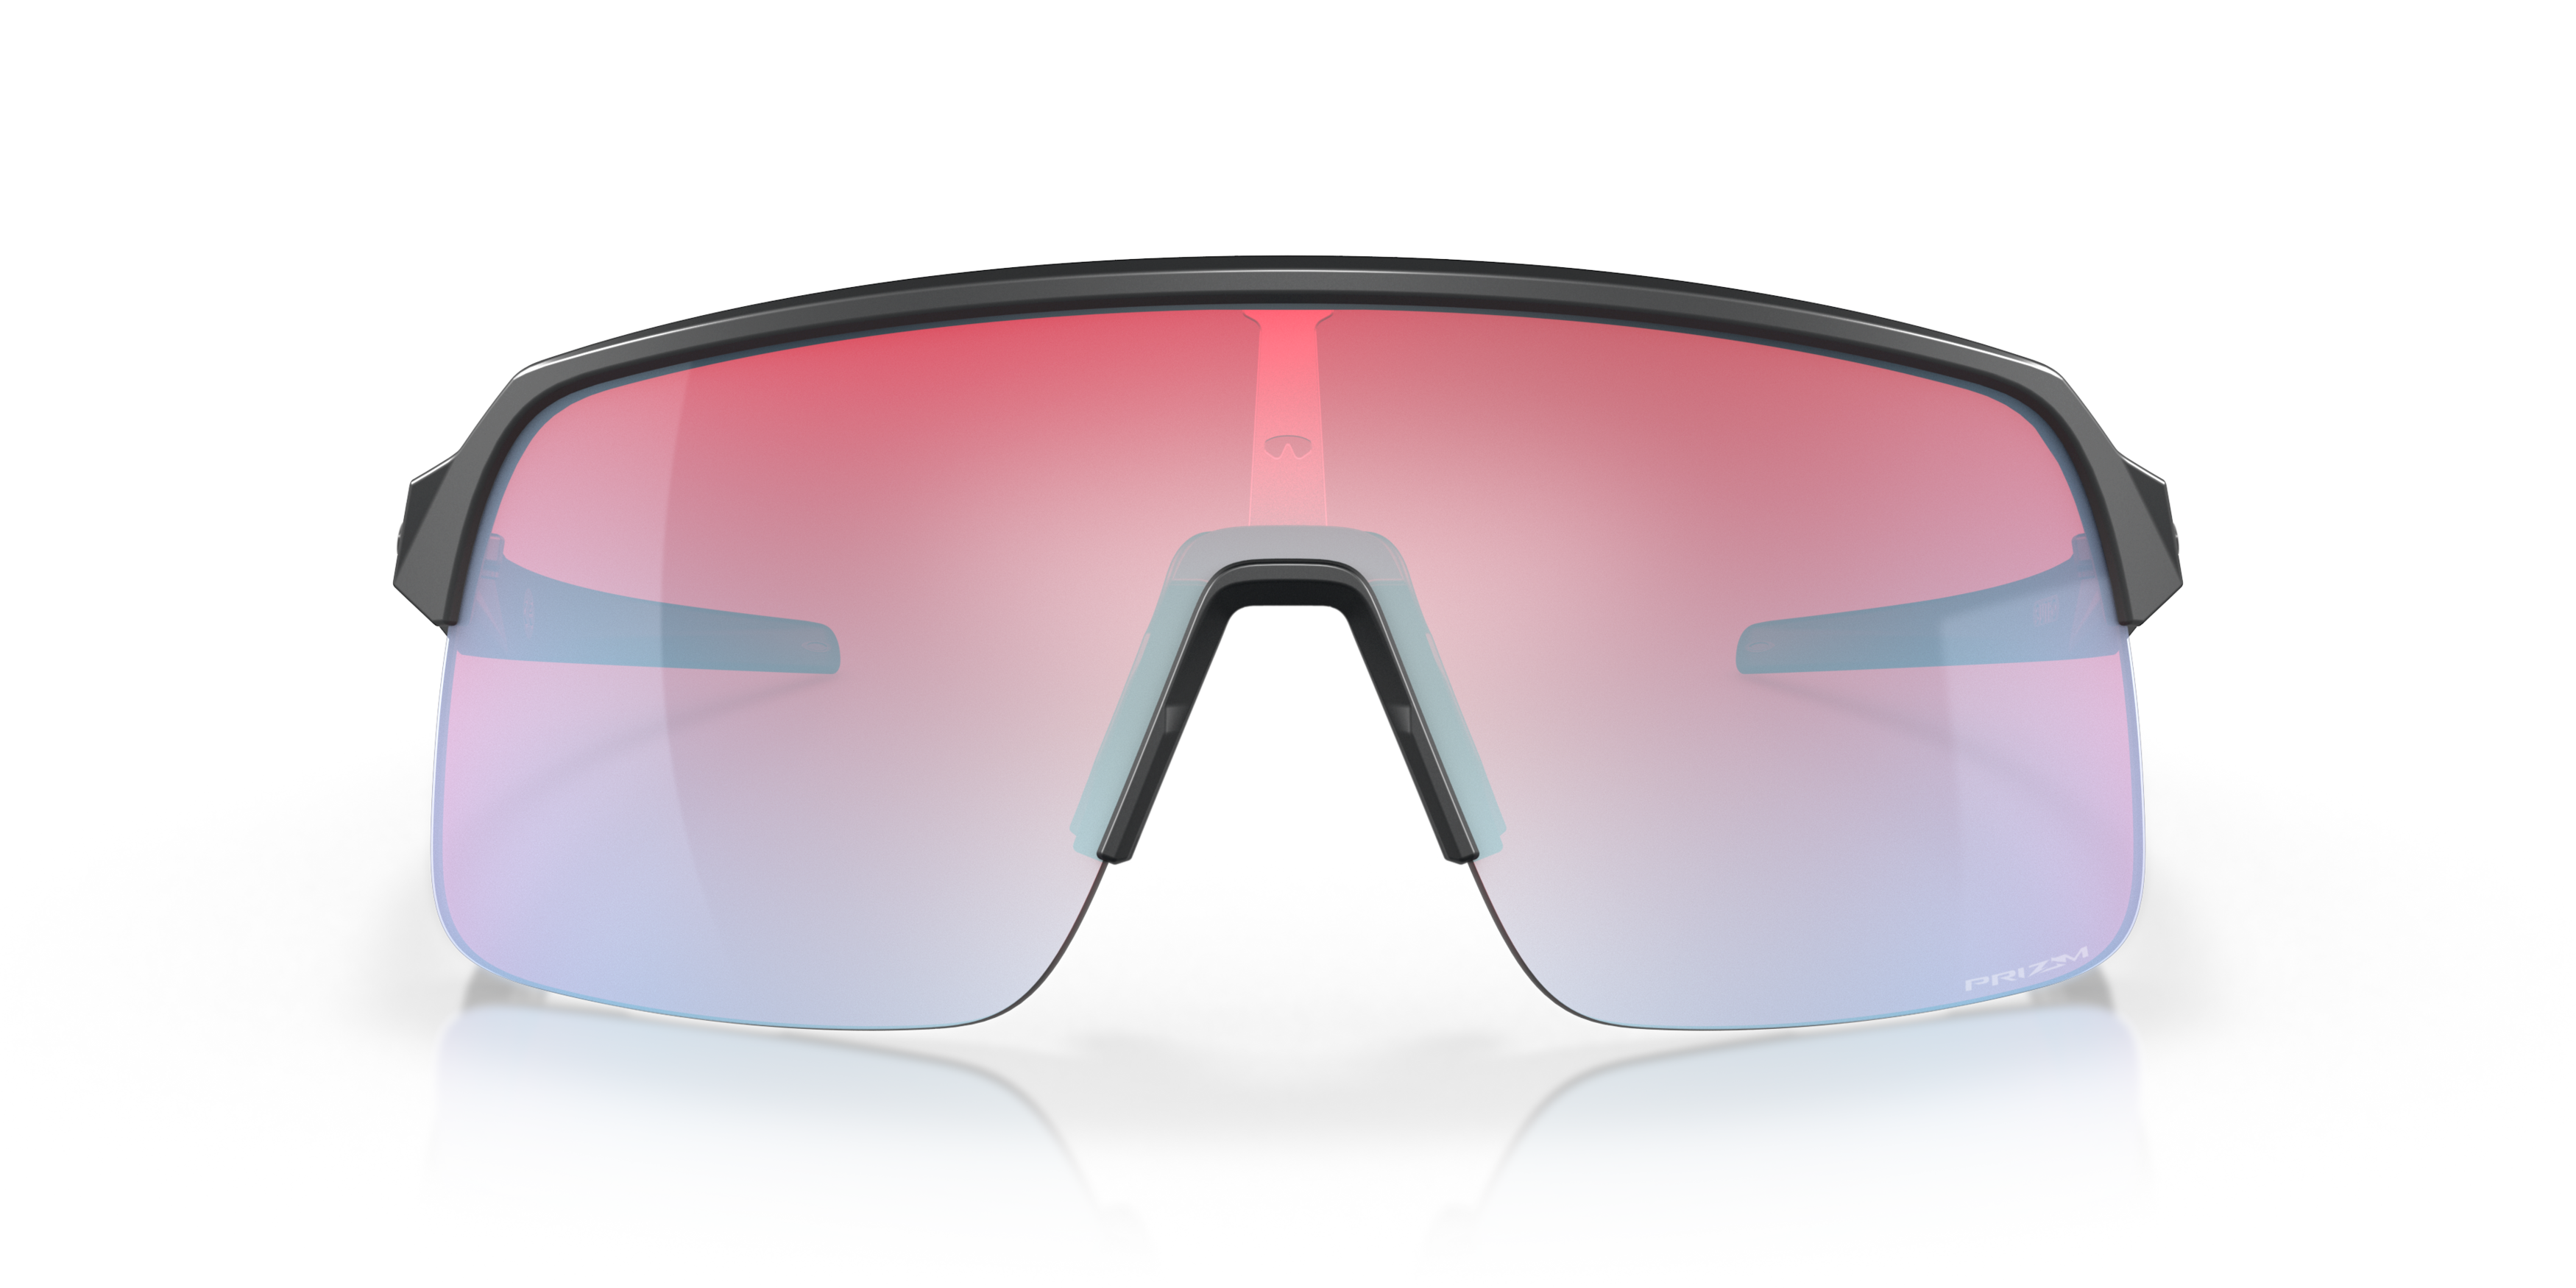 [products.image.front] Oakley 0OO9463 946317